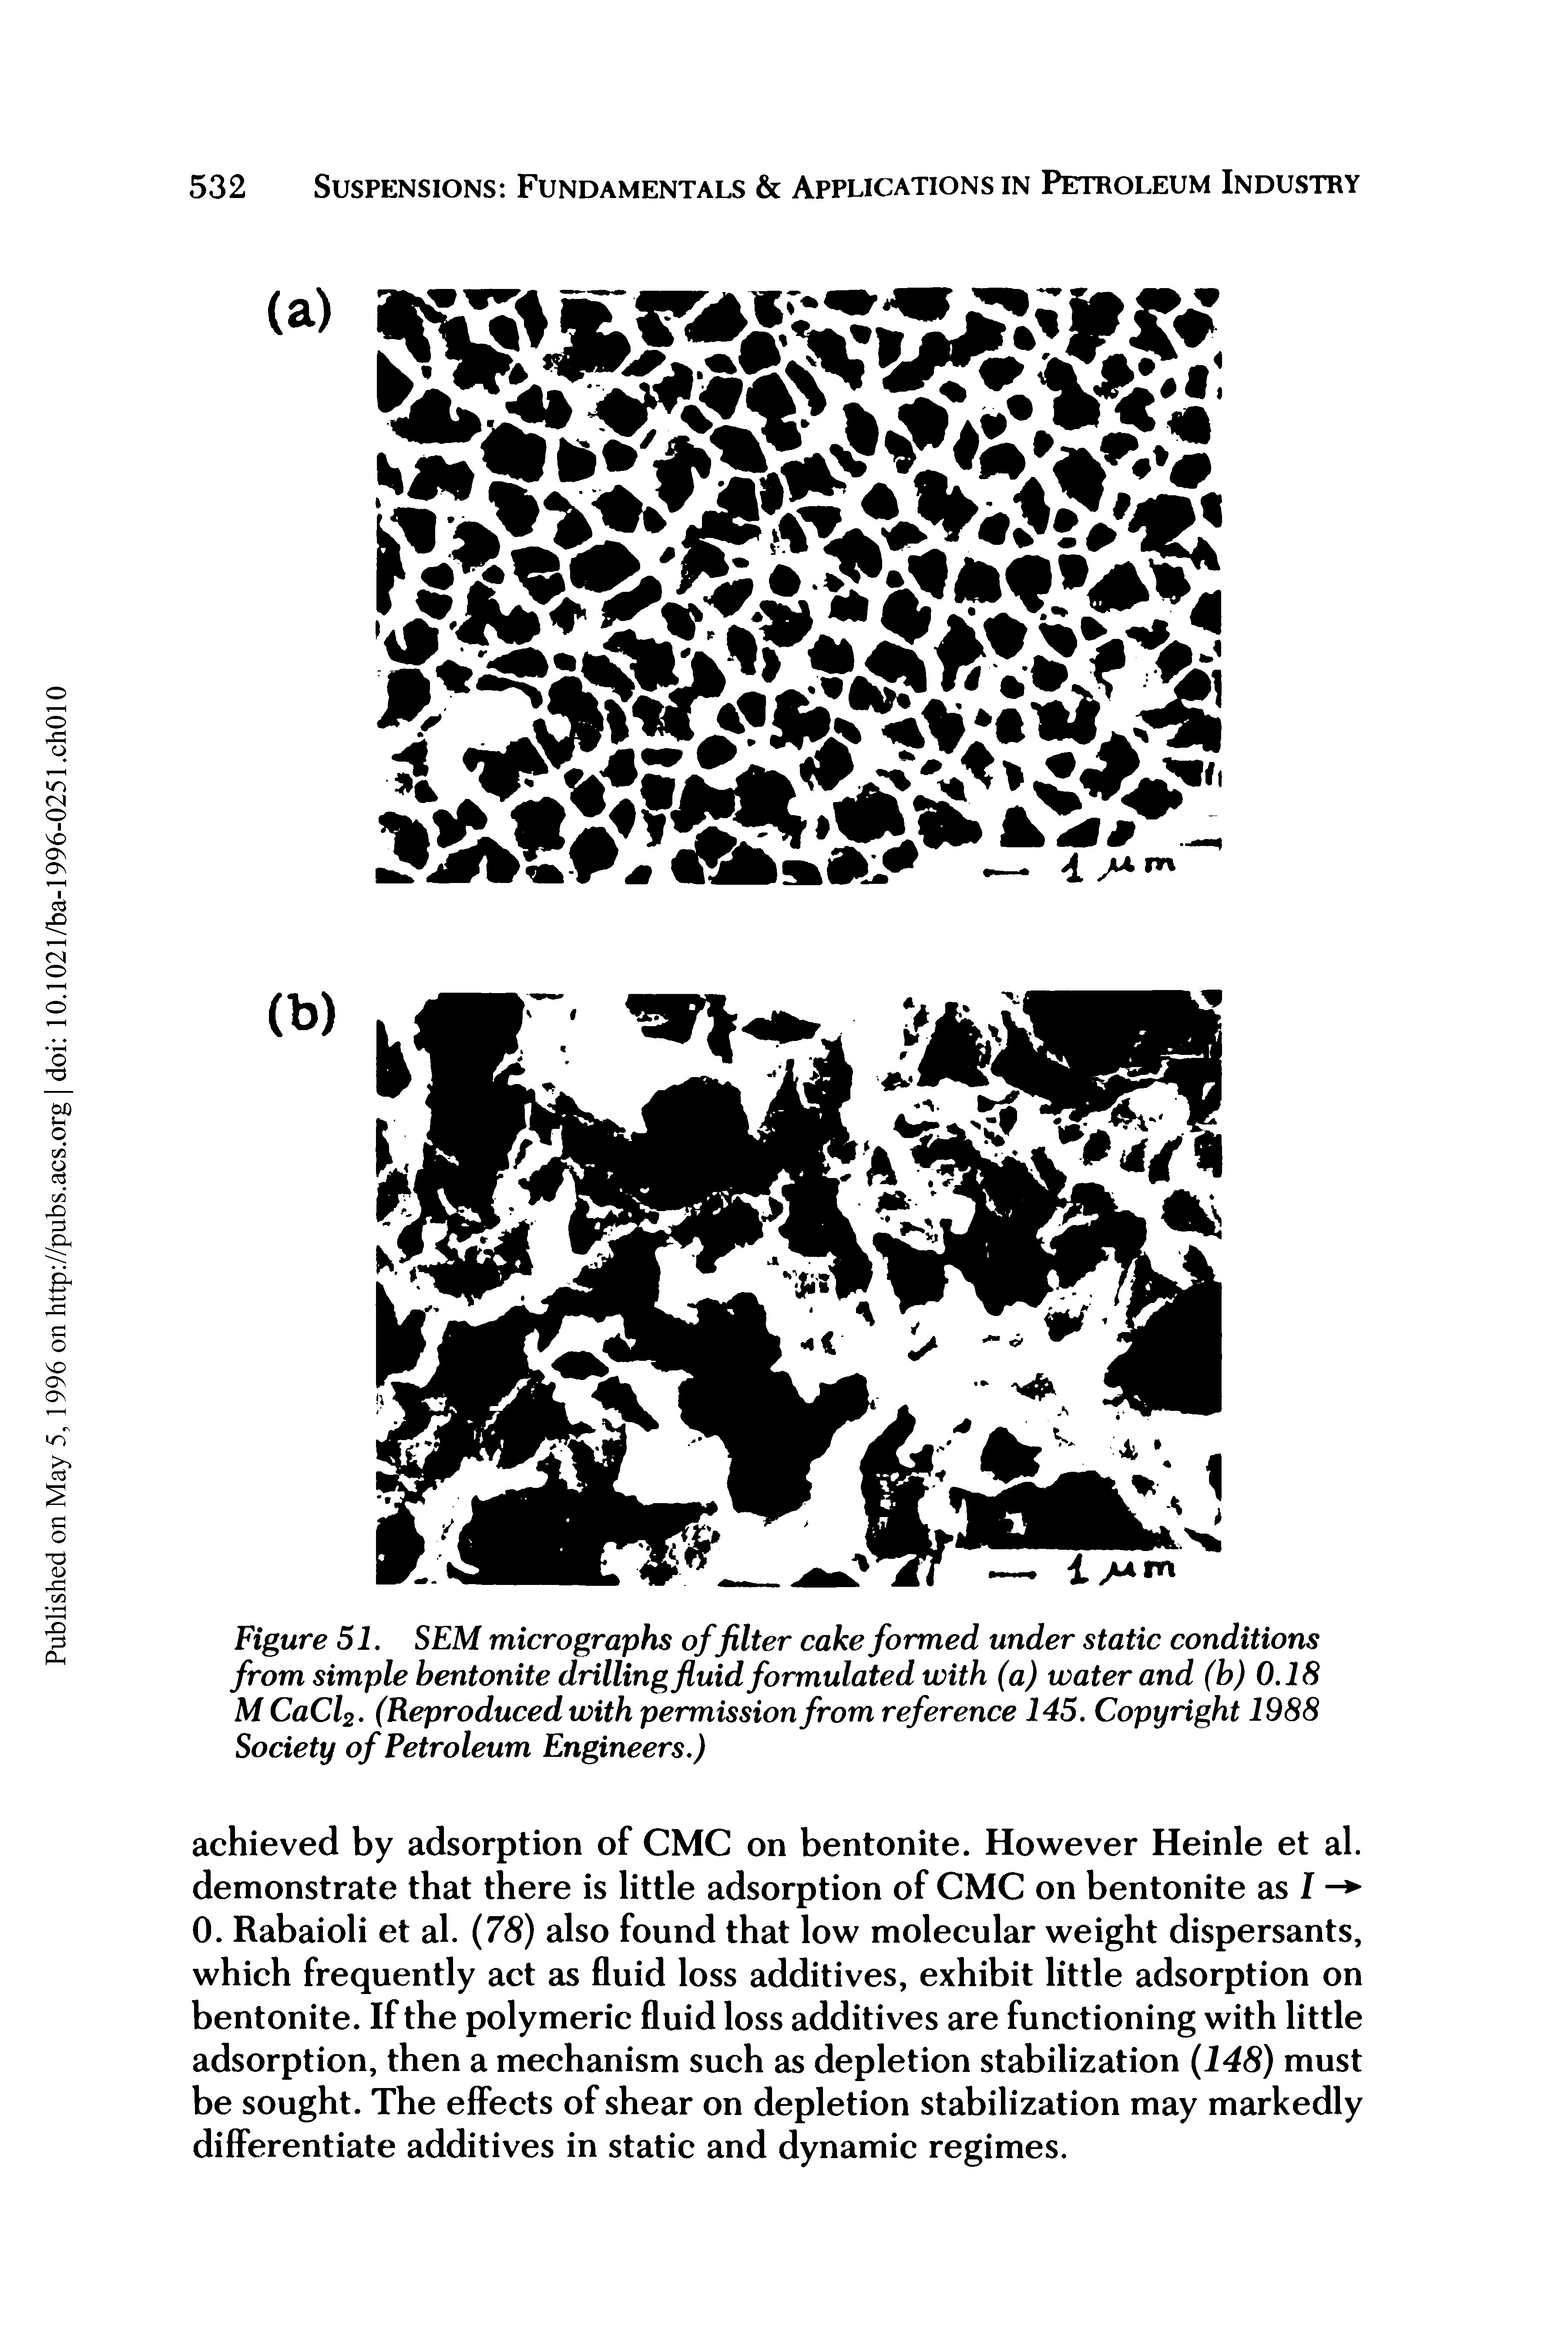 Figure 51. SEM micrographs of filter cake formed under static conditions from simple bentonite drilling fluid formulated with (a) water and (b) 0.18 M CaCl2. (Reproduced with permission from reference 145. Copyright 1988 Society of Petroleum Engineers.)...